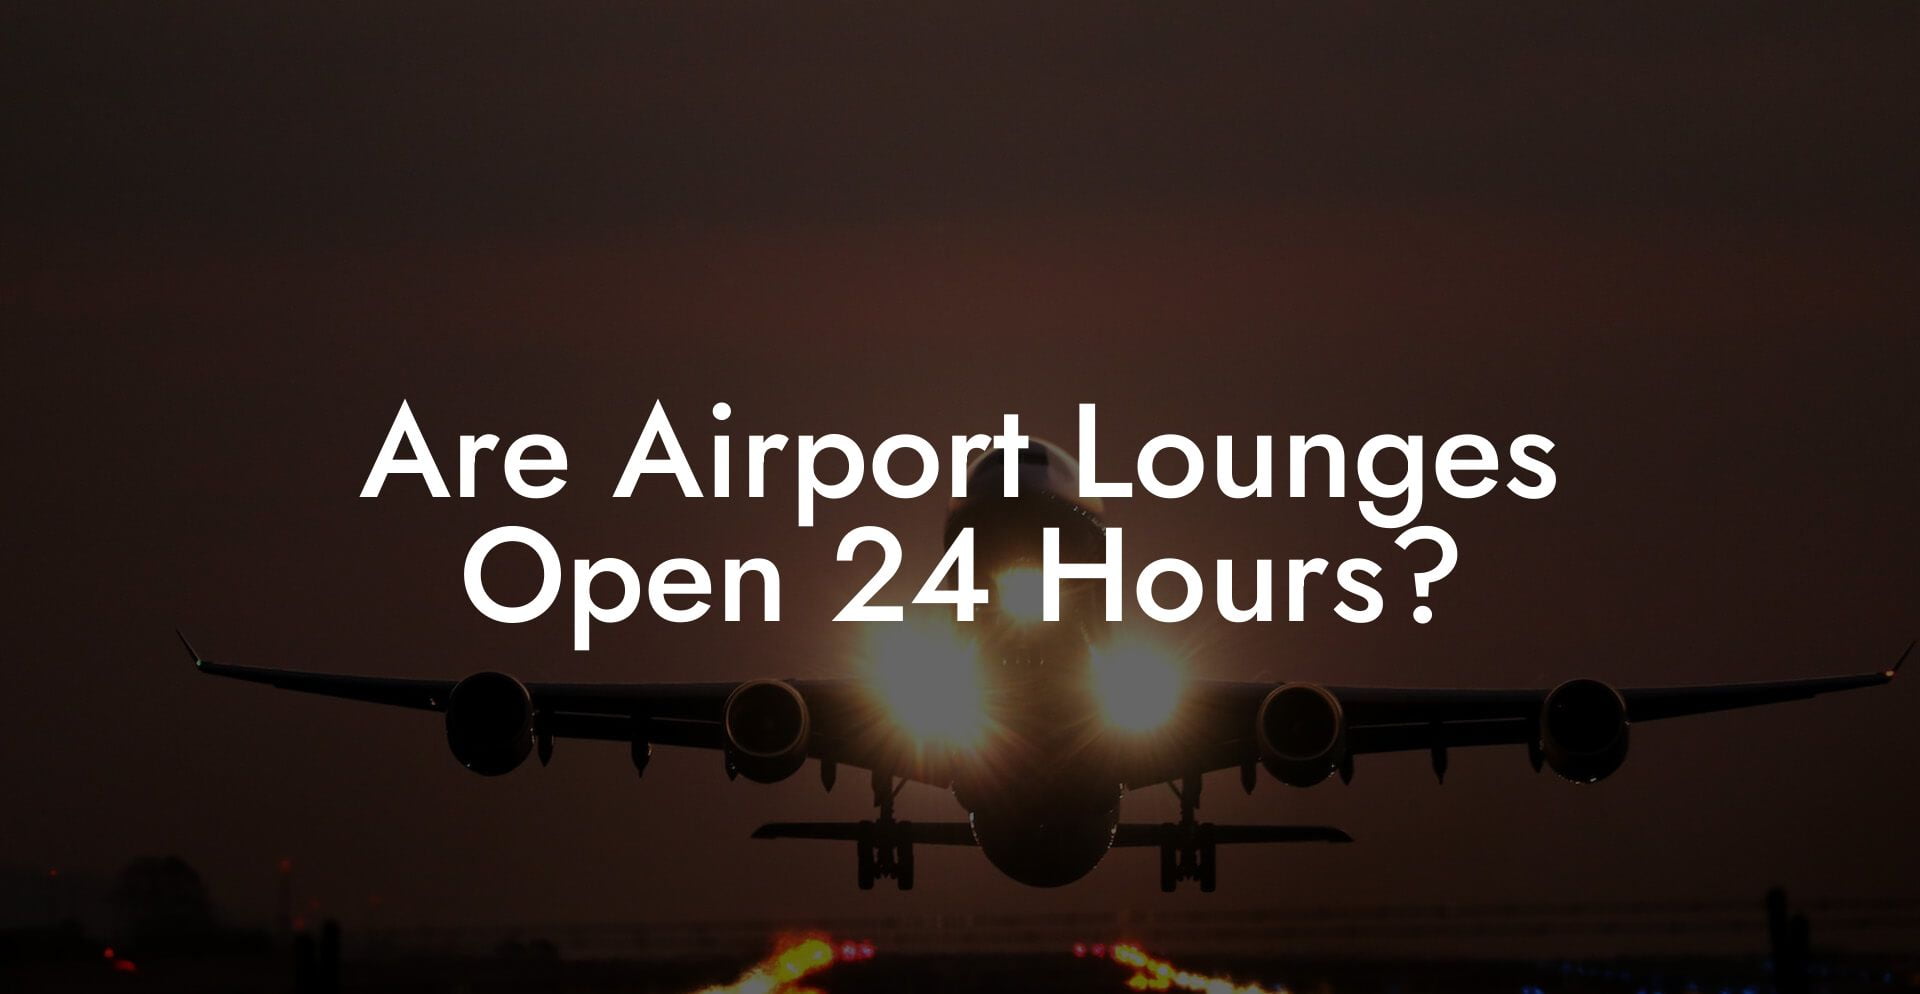 Are Airport Lounges Open 24 Hours?